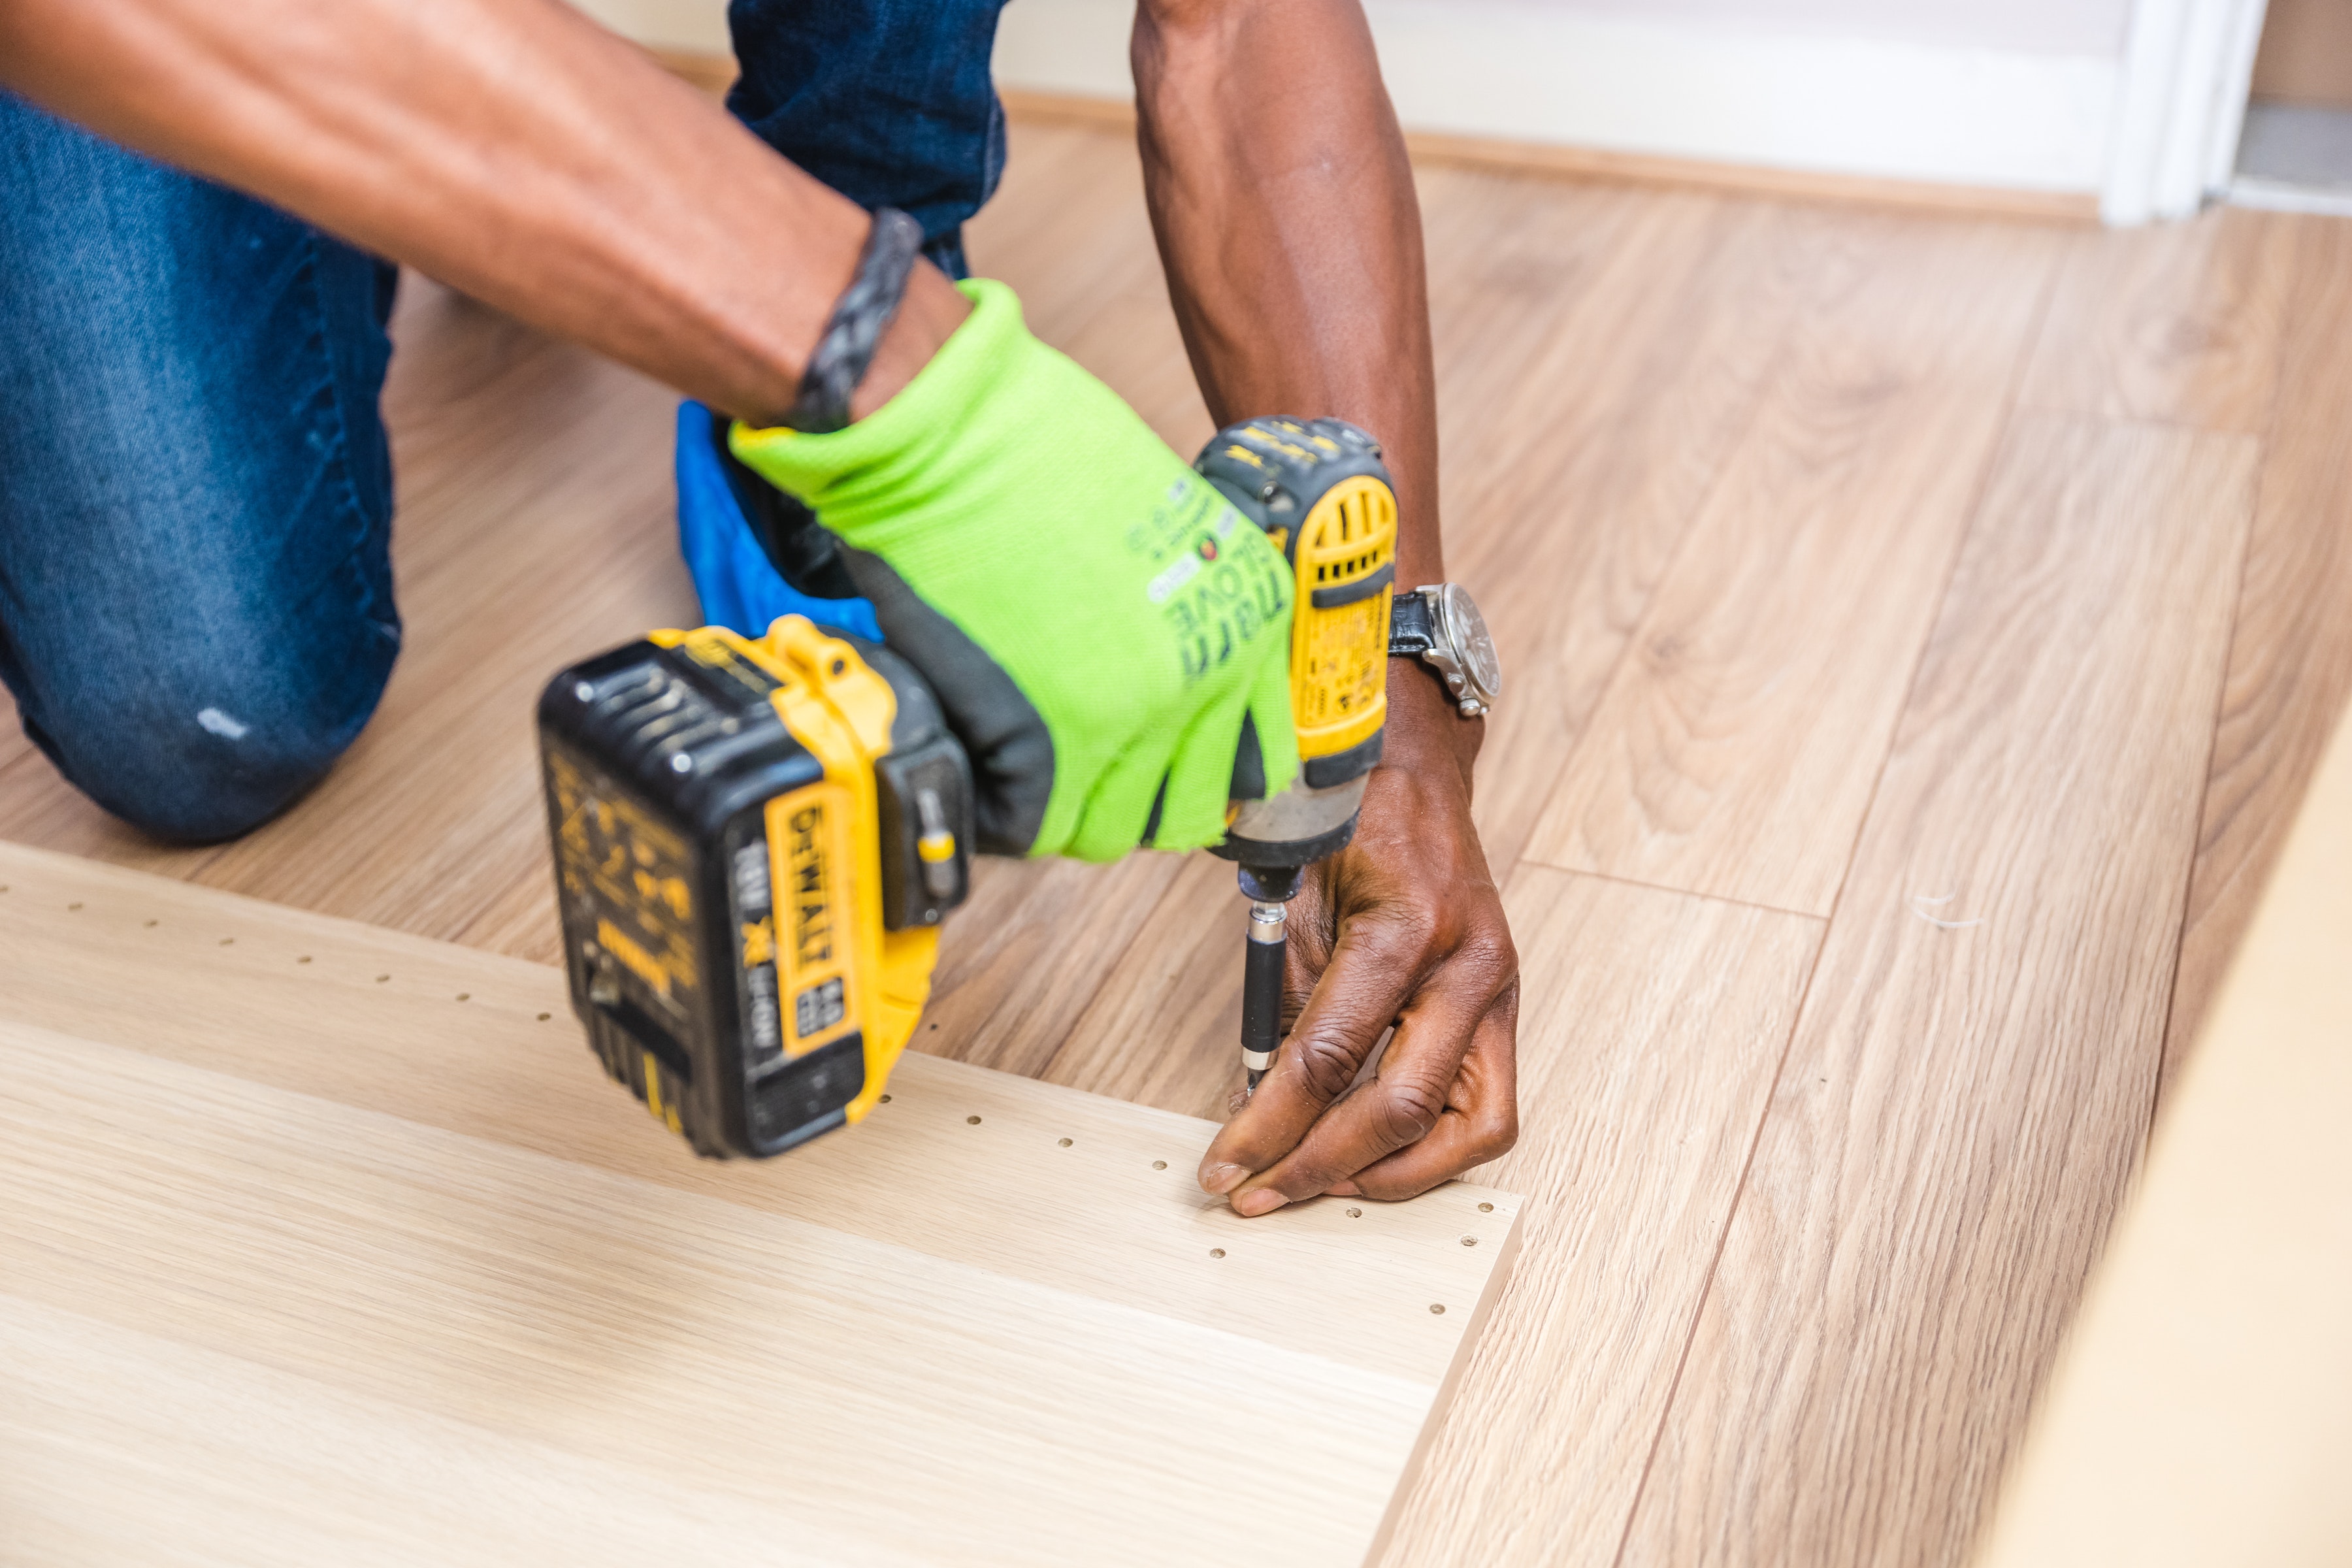 How long does it take to become a skilled carpenter?